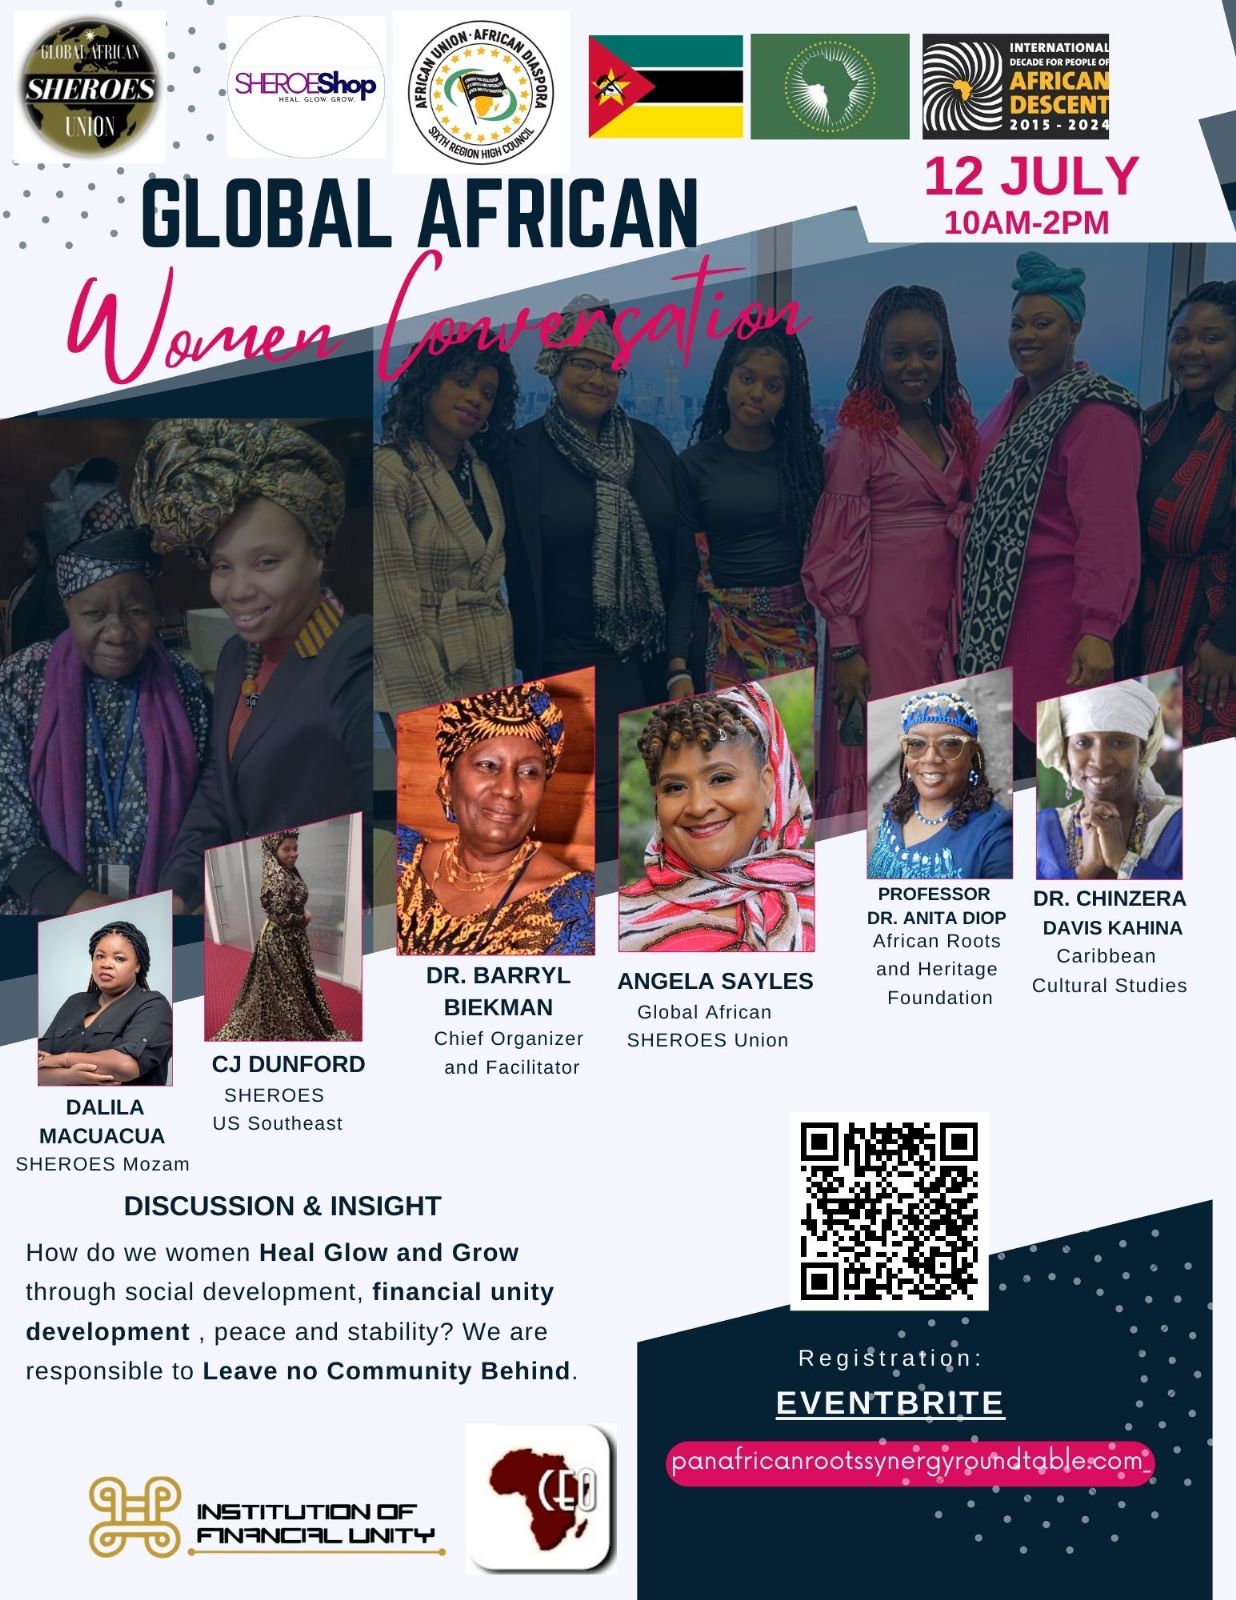 Global African Women Convention